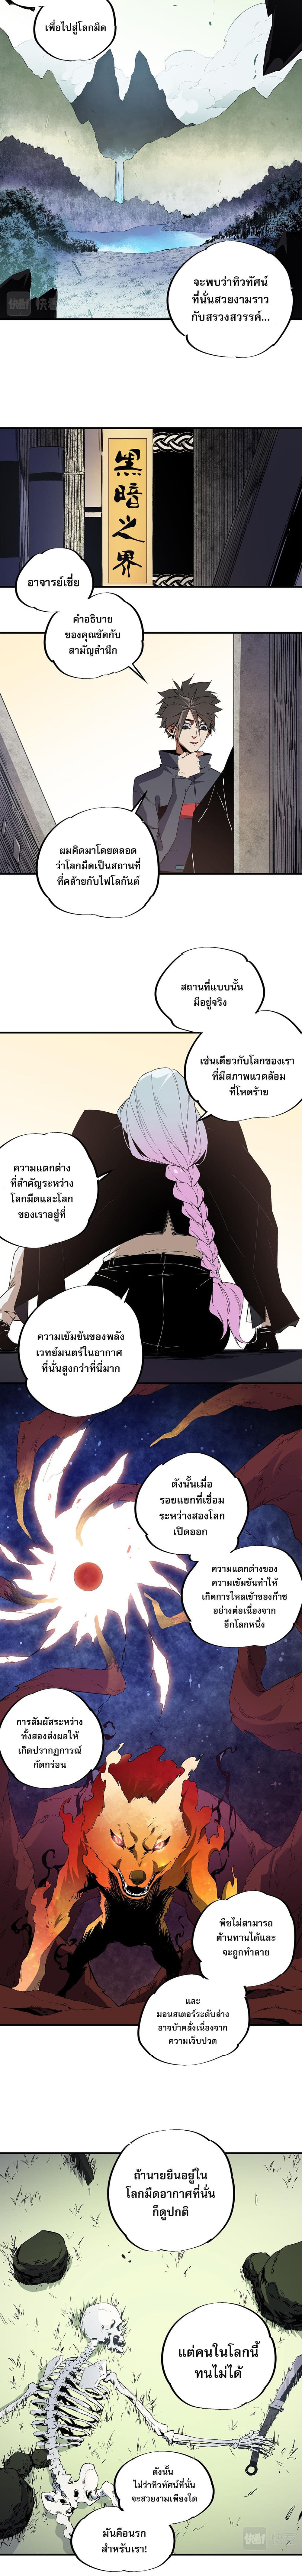 Job Changing for the Entire Population: The Jobless Me Will Terminate the Gods ฉันคือผู้เล่นไร้อาชีพที่สังหารเหล่าเทพ 56-56